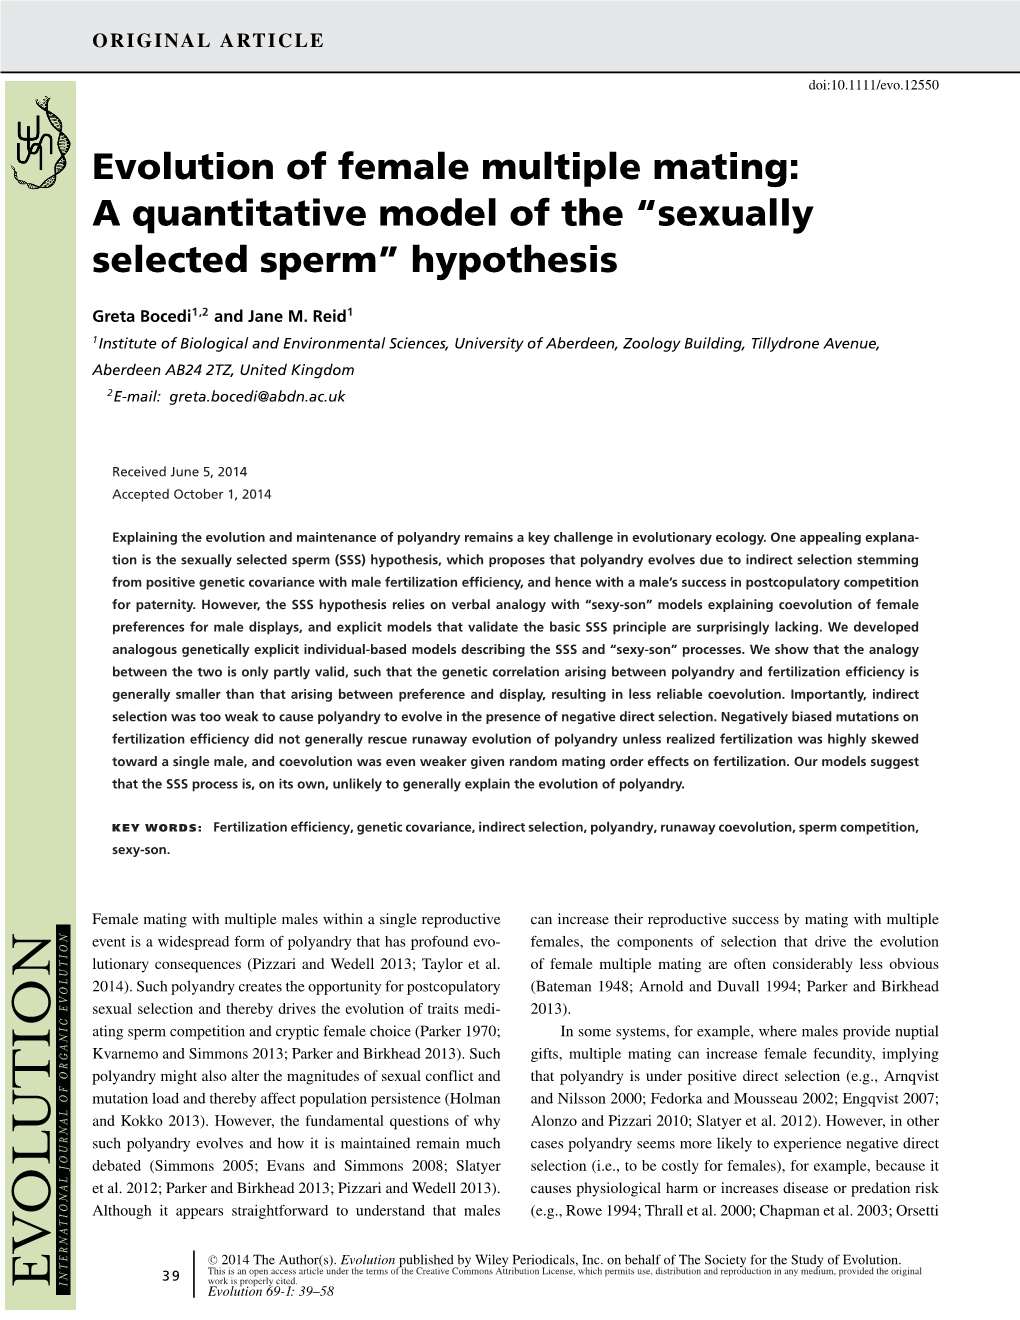 Evolution of Female Multiple Mating: a Quantitative Model of the “Sexually Selected Sperm” Hypothesis